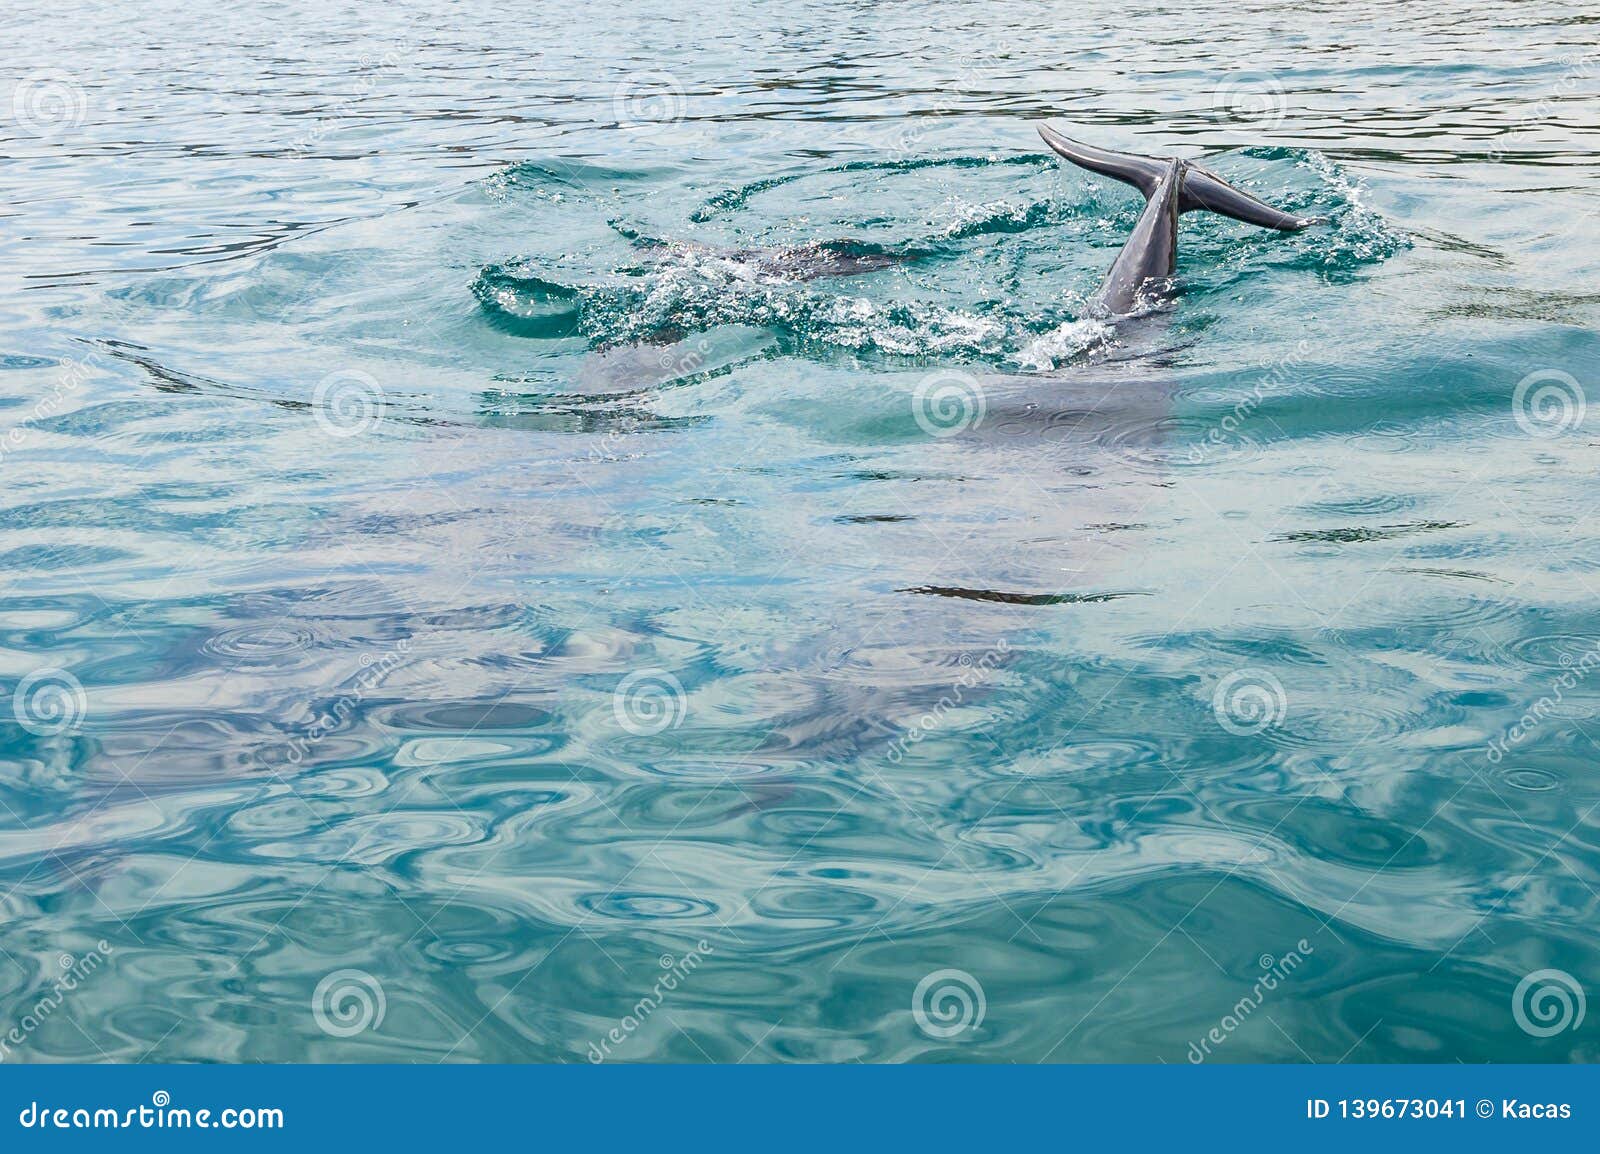 Dolphins Swimming Near The Coast In The Red Sea Waters In ...